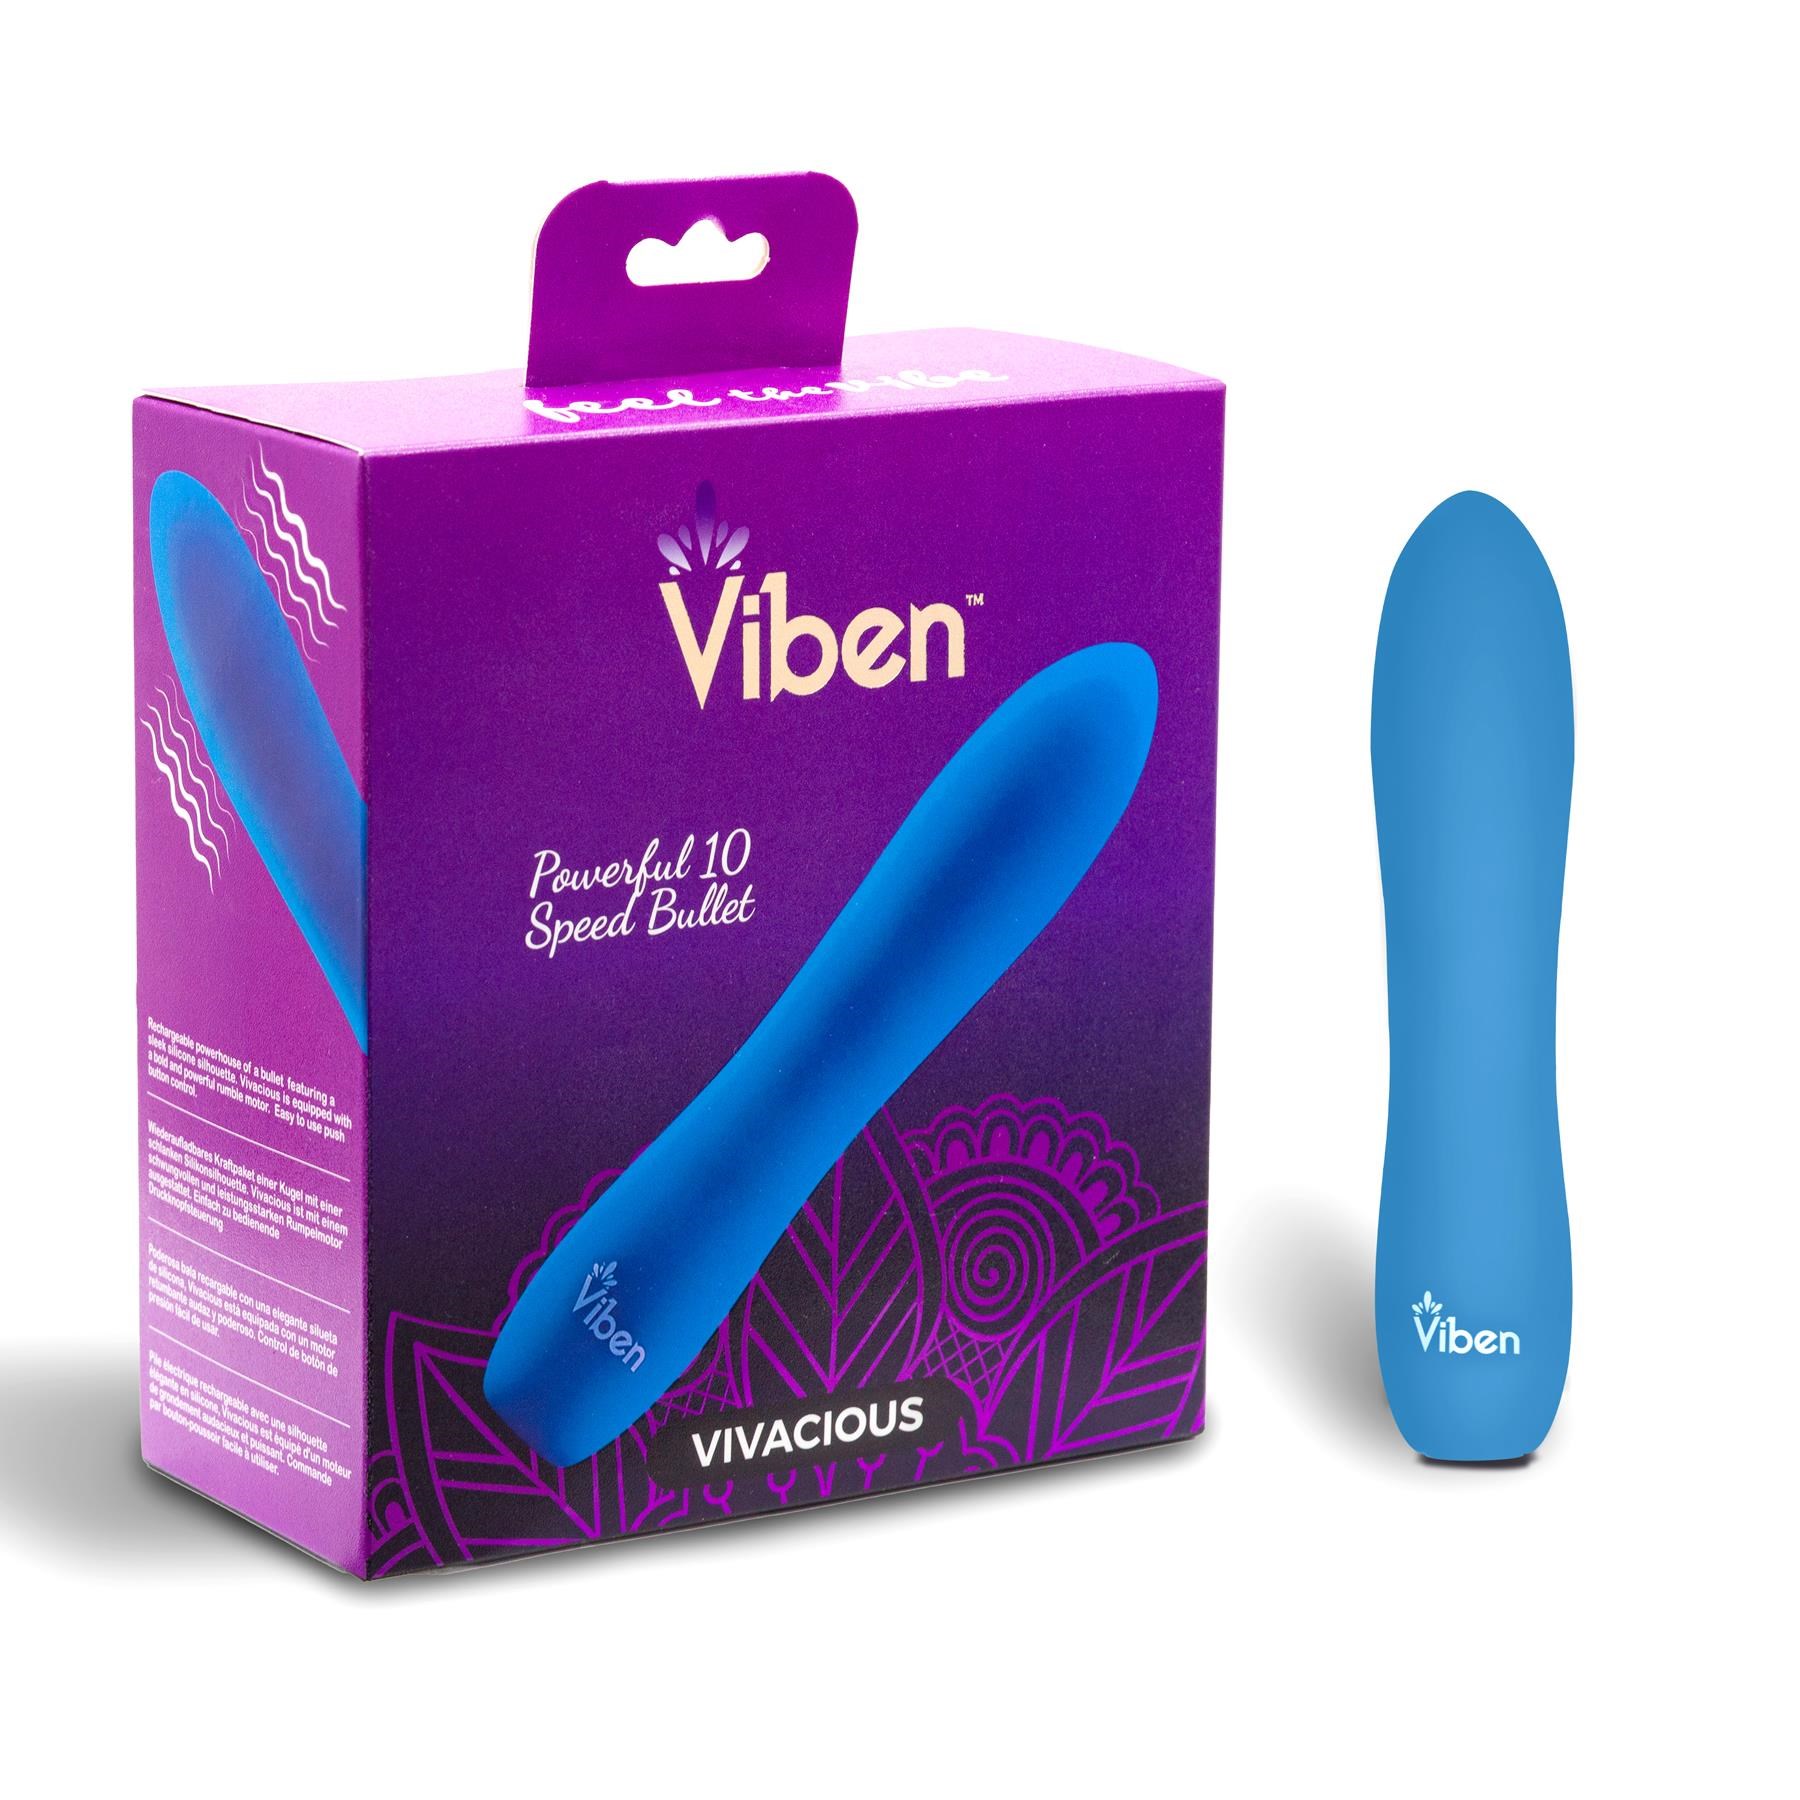 Vivacious Rechargeable 10 Speed Bullet - Product and Packaging